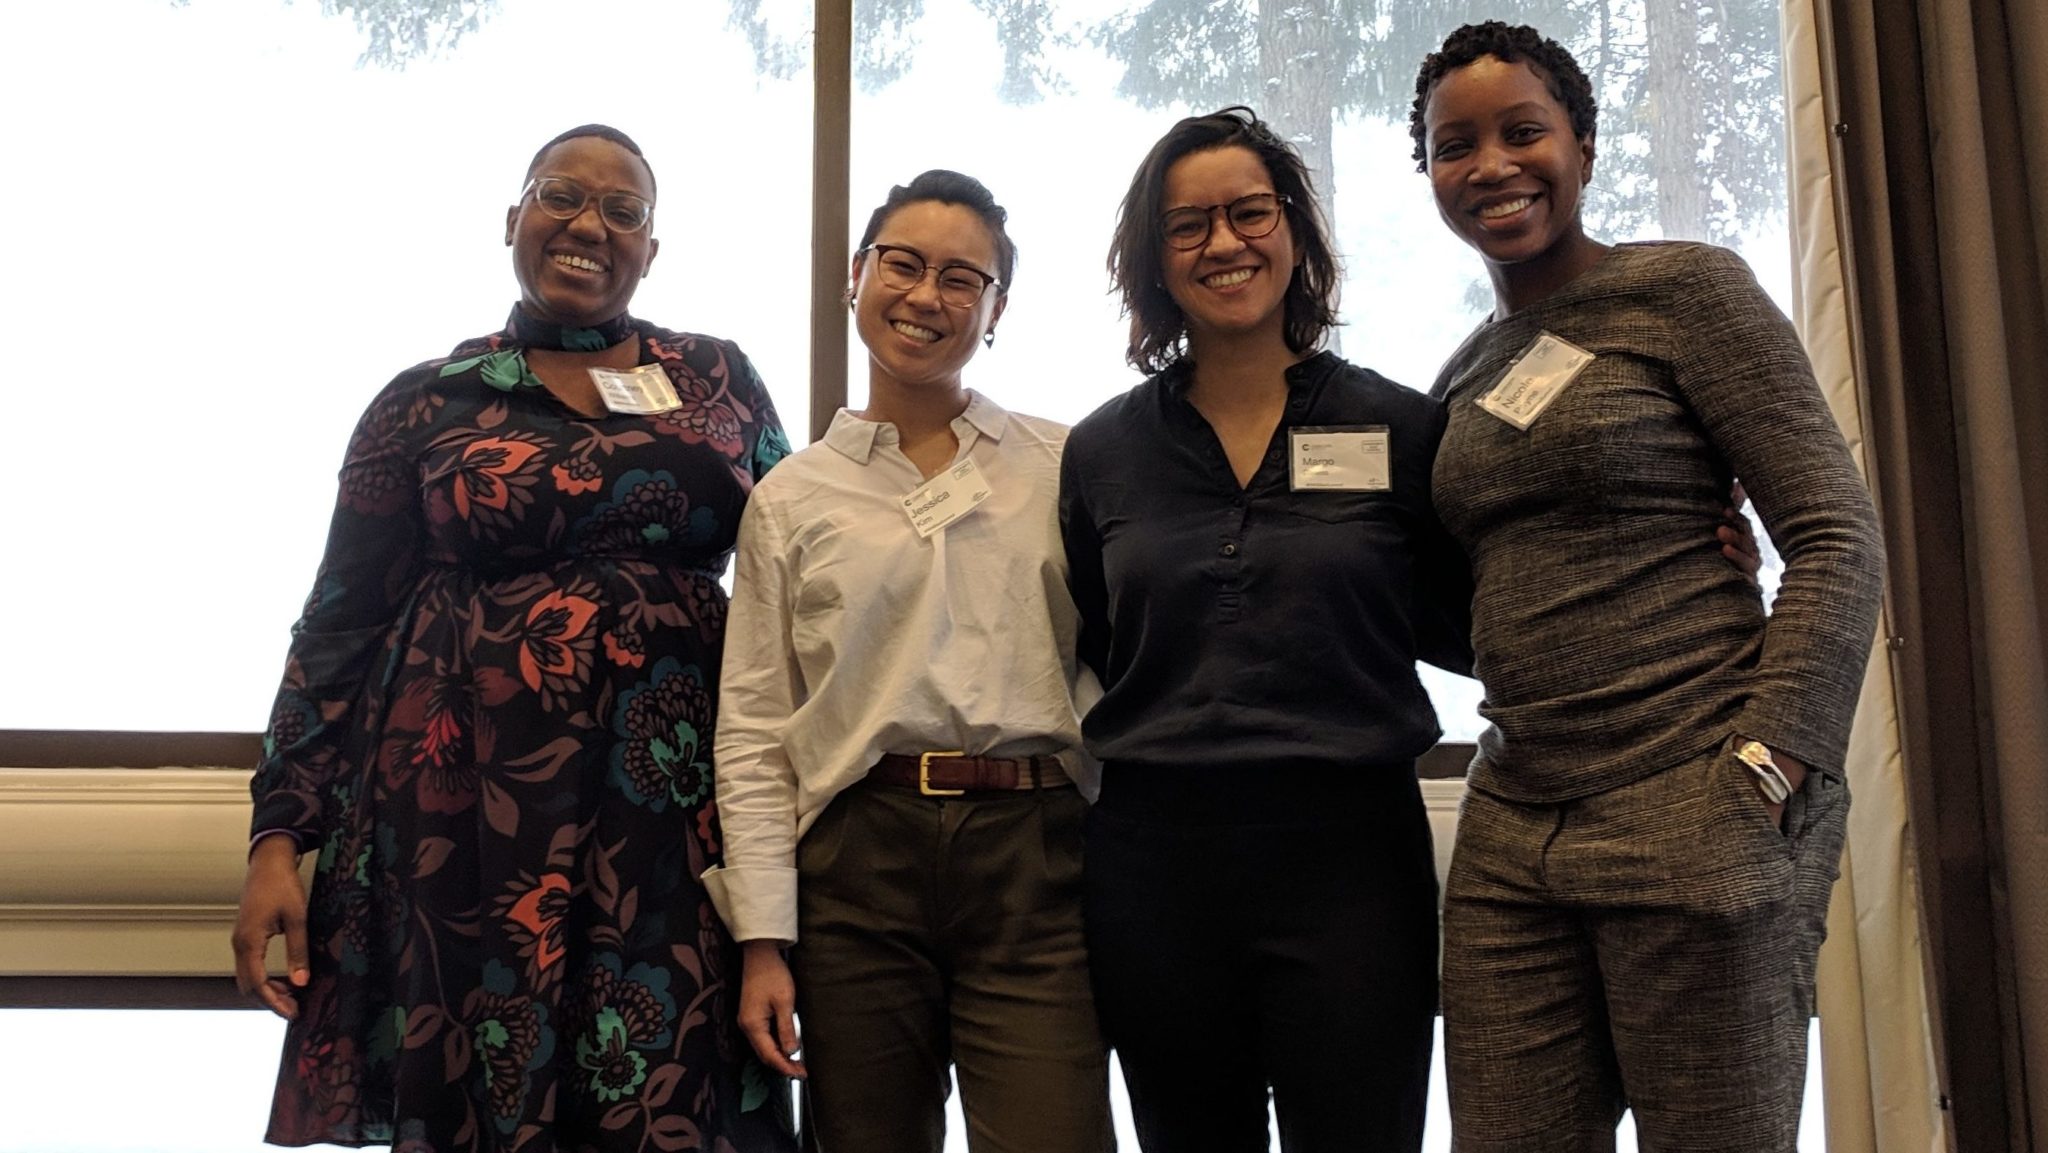 Jess at the Washington Bike Summit: Jess (in the white shirt) stands proudly next to (left to right) Courtney Williams of The Bike Brown Girl, Margo Dawes (fellow SDOT Change Team co-chair), and Nicole Payne from NACTO at the Washington Bike Summit in February of 2019 where this dynamic panel discussed Transportation Equity.